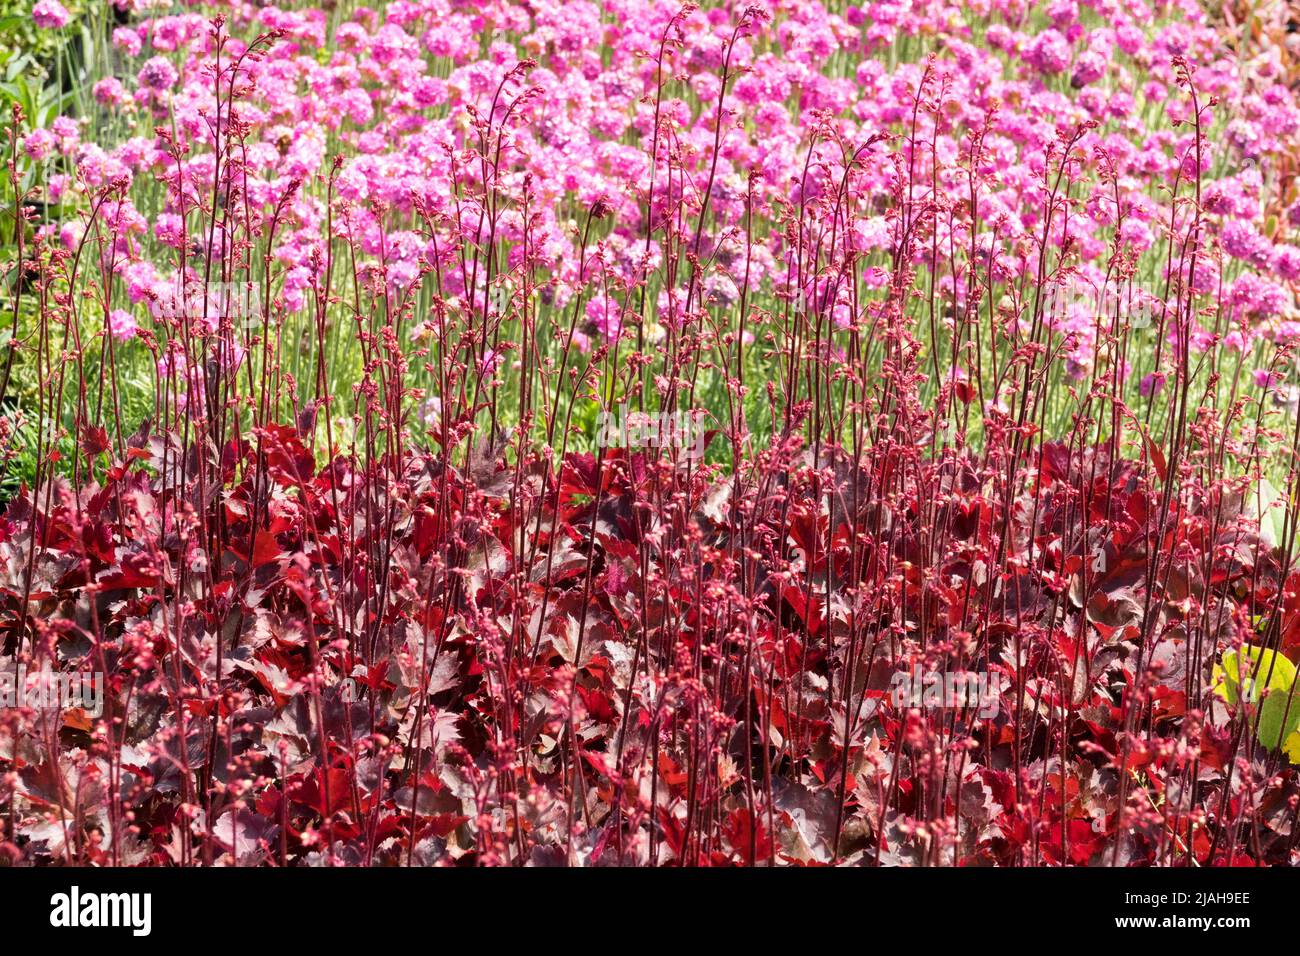 Red Pink Contrast Plants Garden Heuchera 'Neptune' Armeria maritima 'nifty Thrifty' Border Blooming Sea Rose Thrift Seapink Spring Mixed Flowers Foto Stock